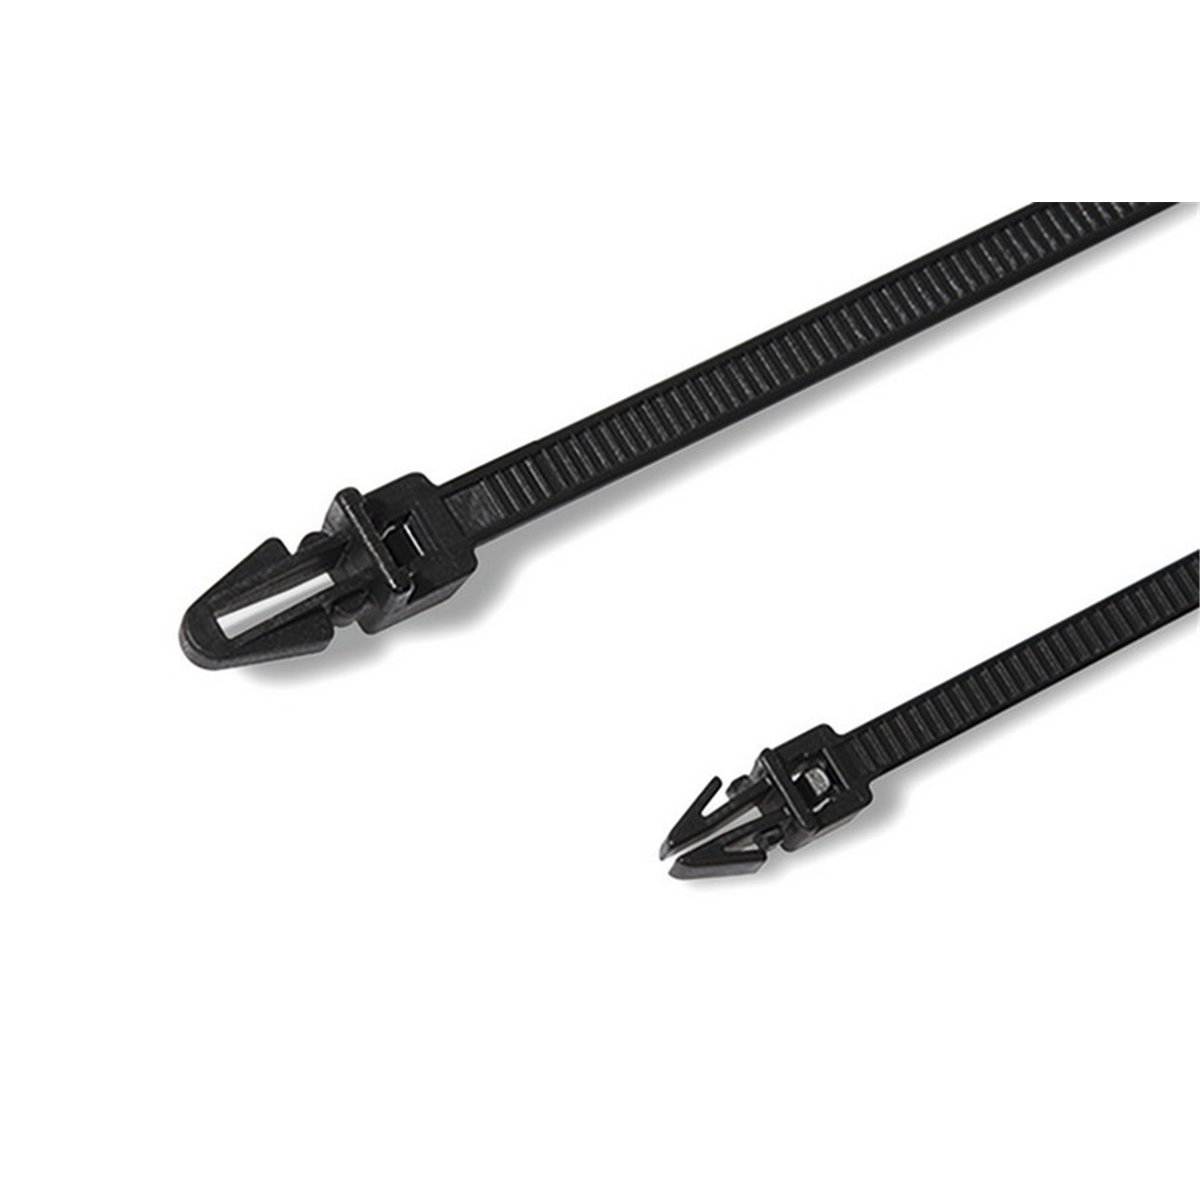 Fixing cable tie T30RSF-PA66HS-BK 3.6x158mm, black HellermannTyton